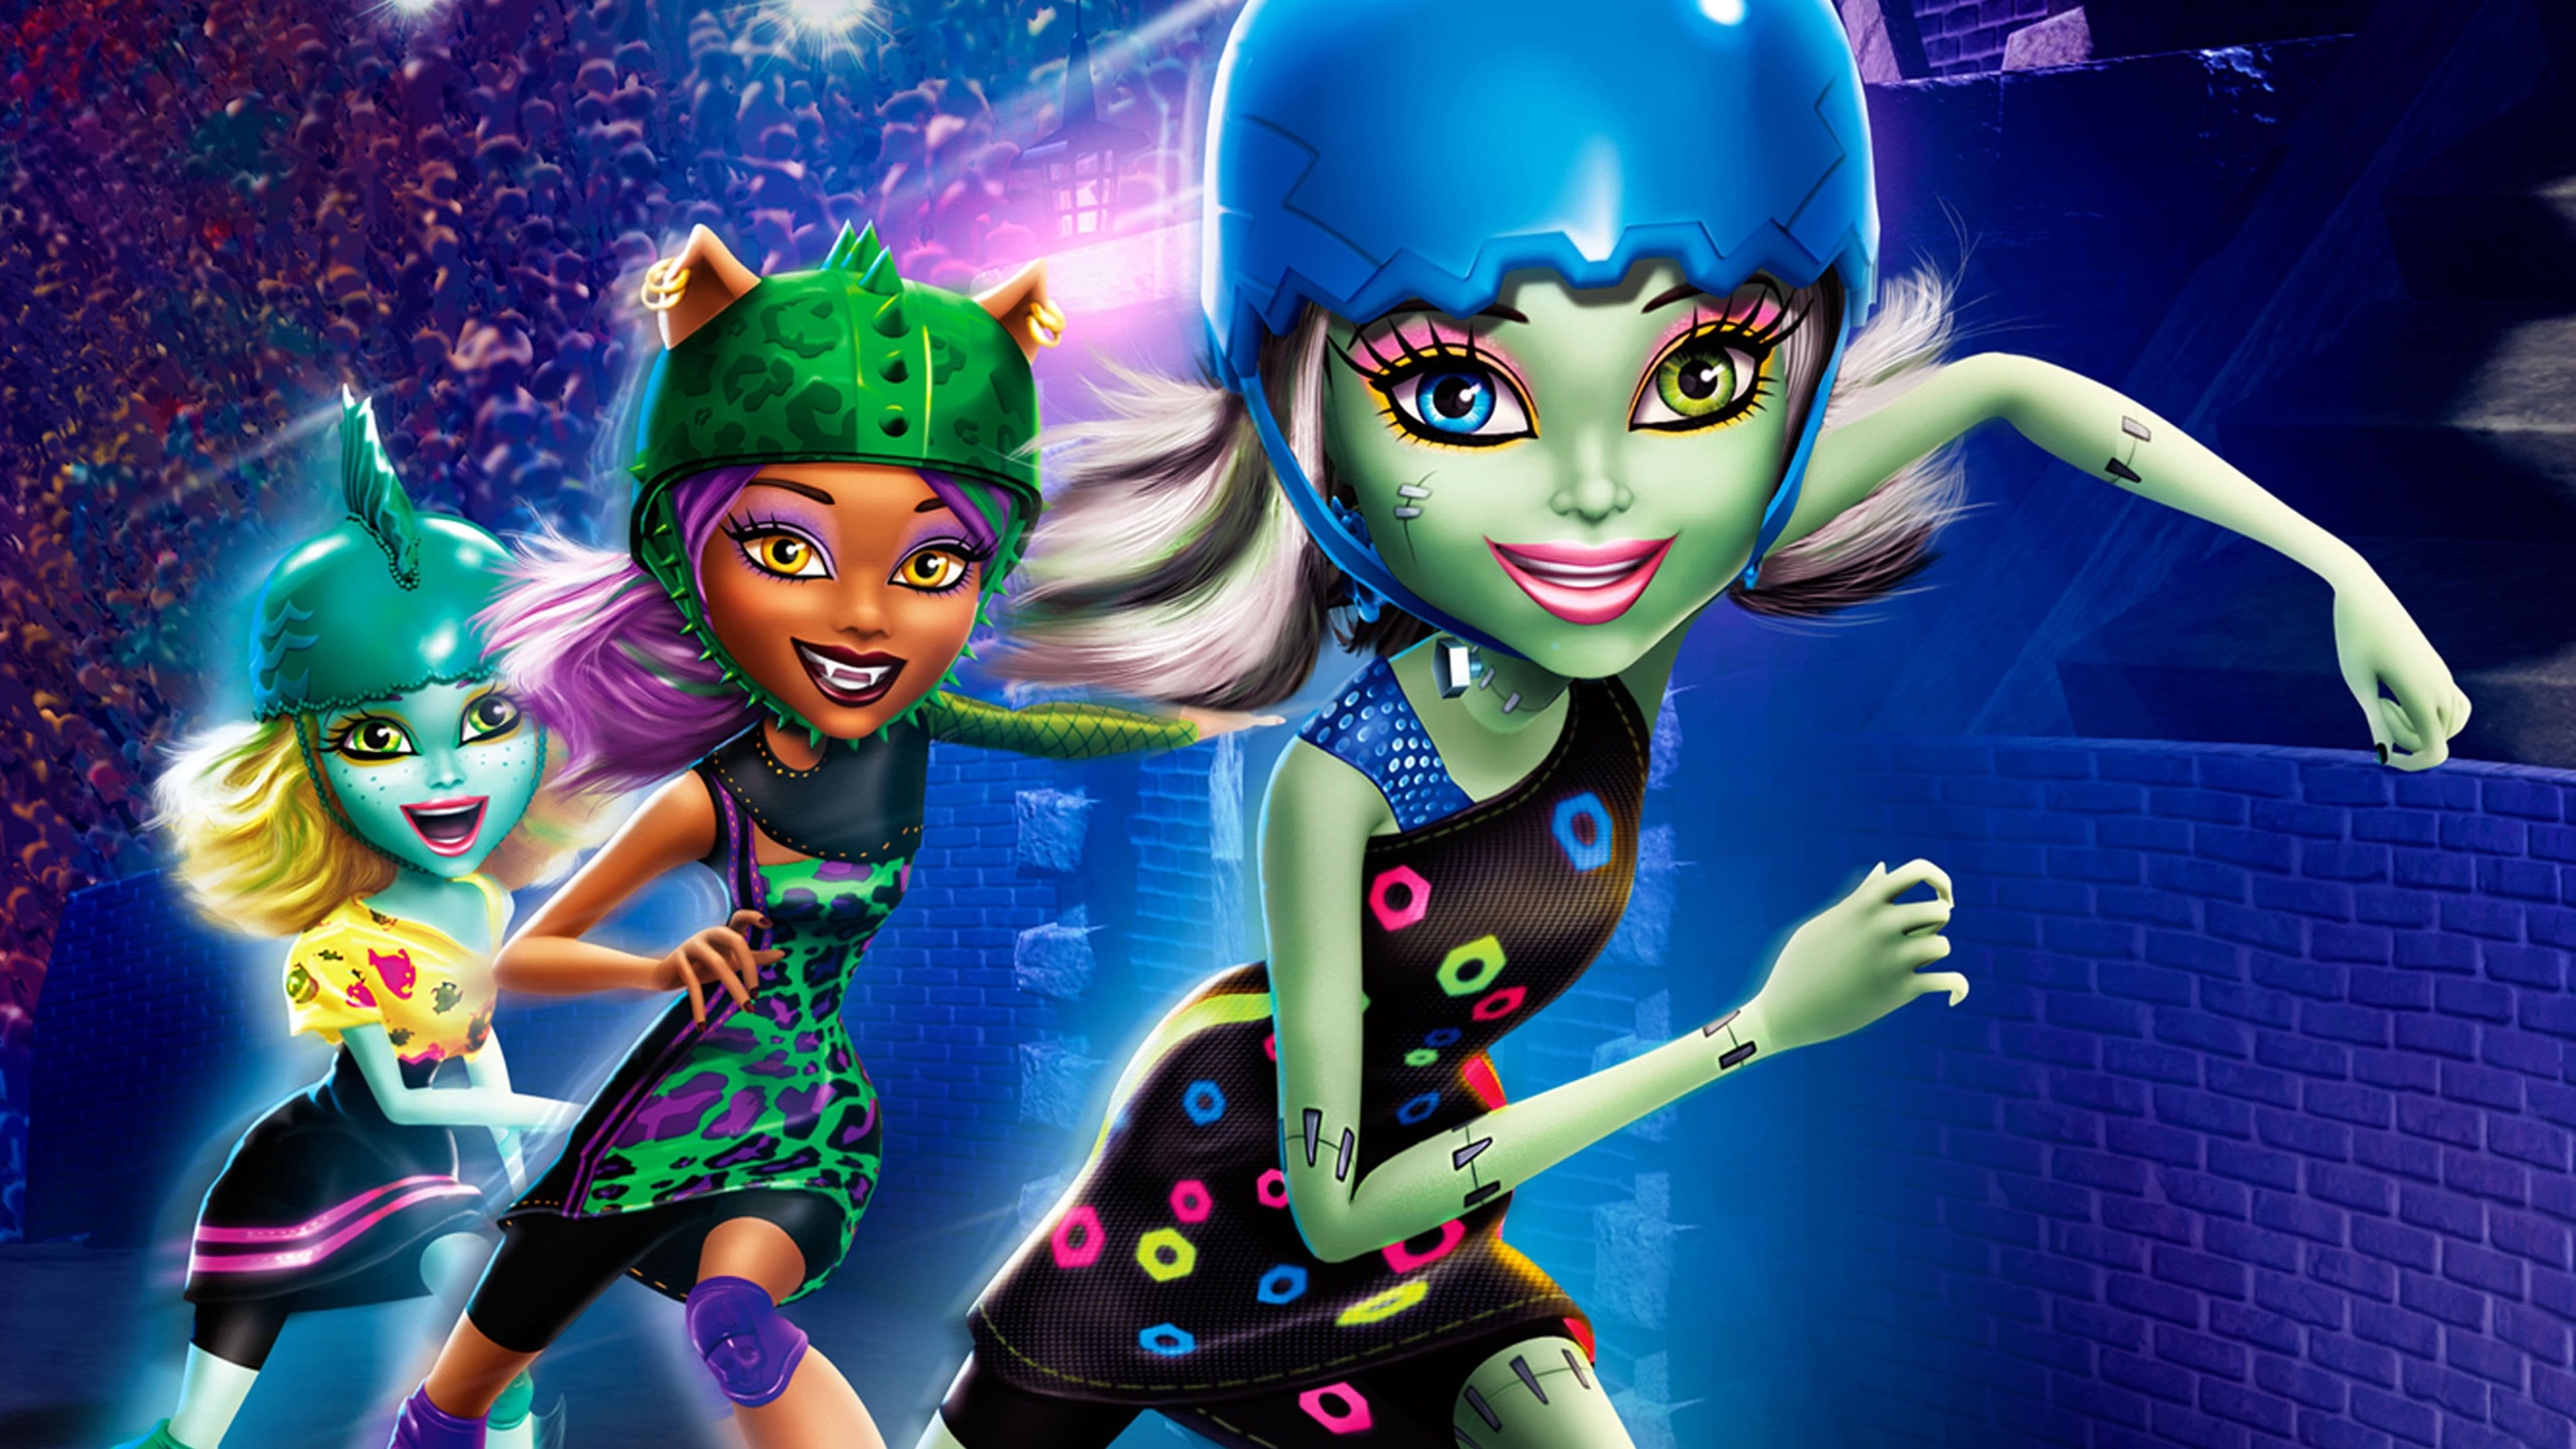 Monster High: Friday Night Frights 2012 123movies